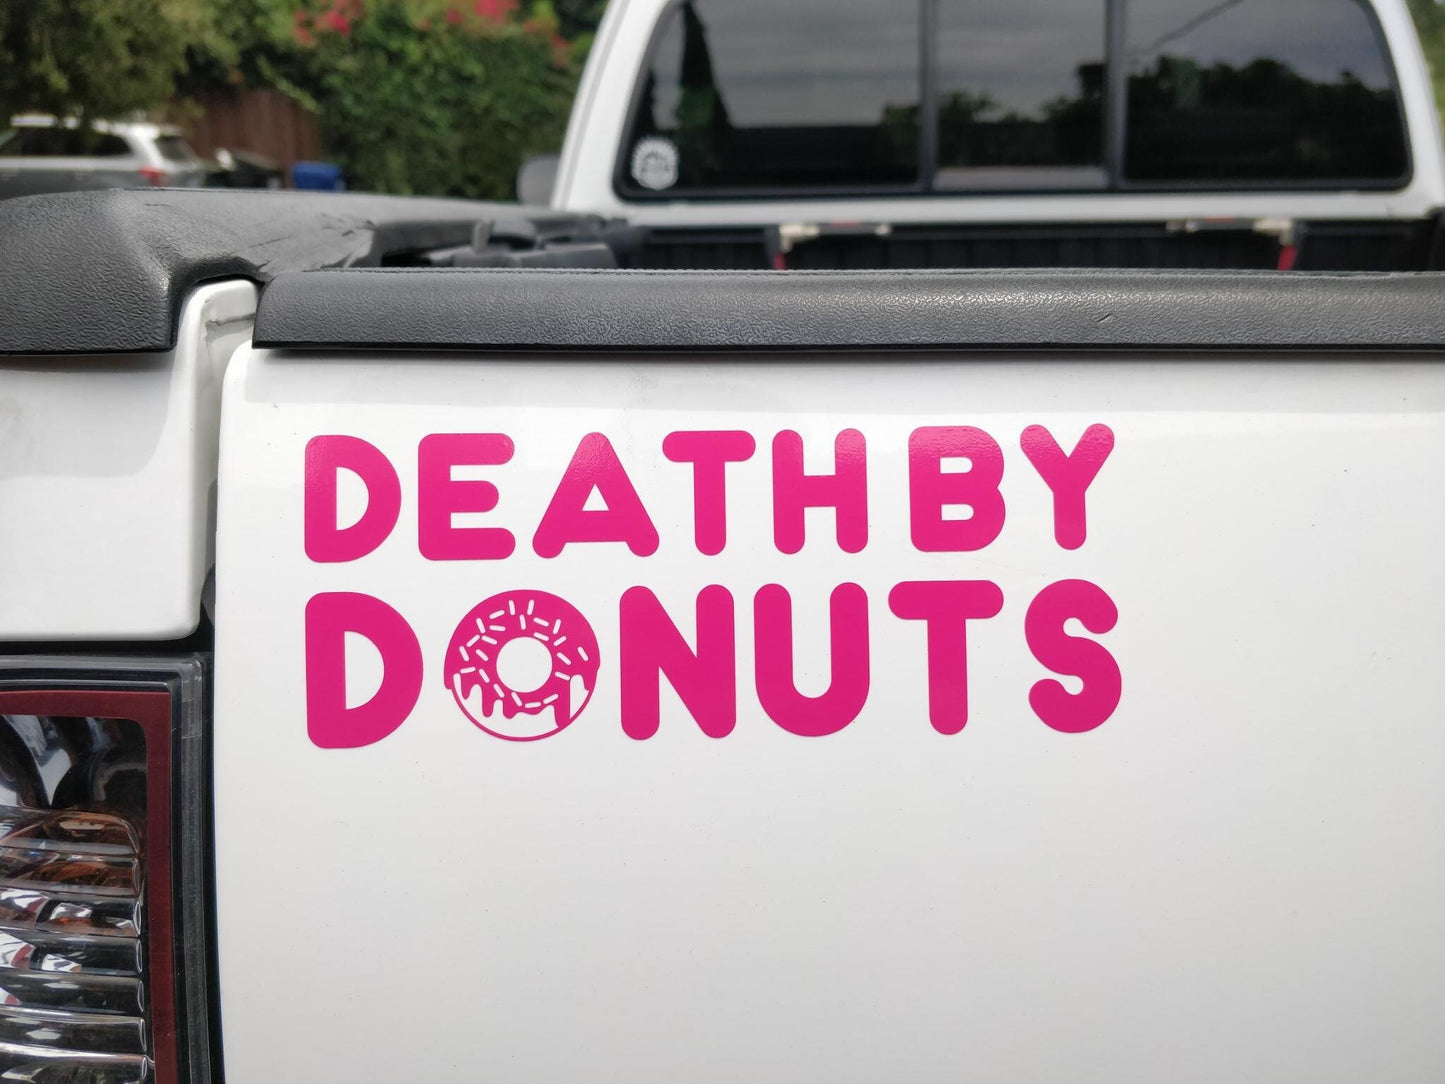 Death by Donuts Decal